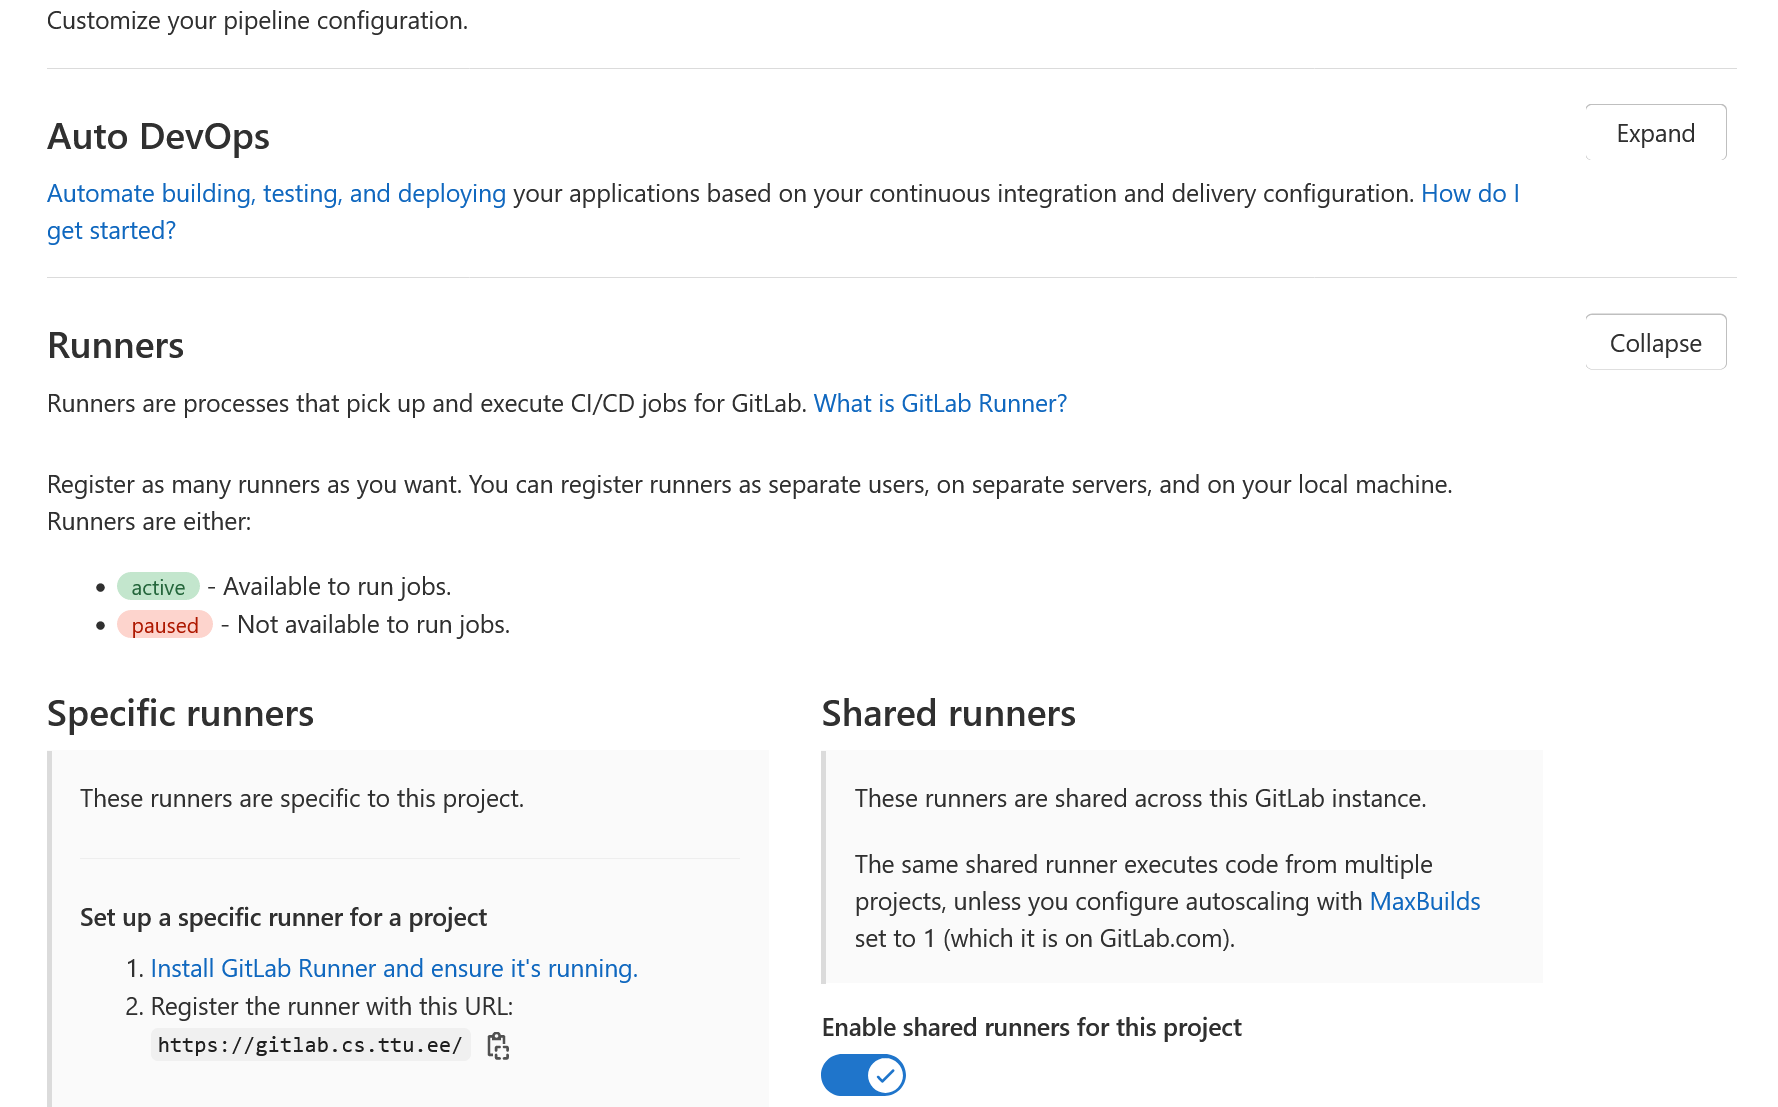 ../_images/gitlab-enable-shared-runners.png